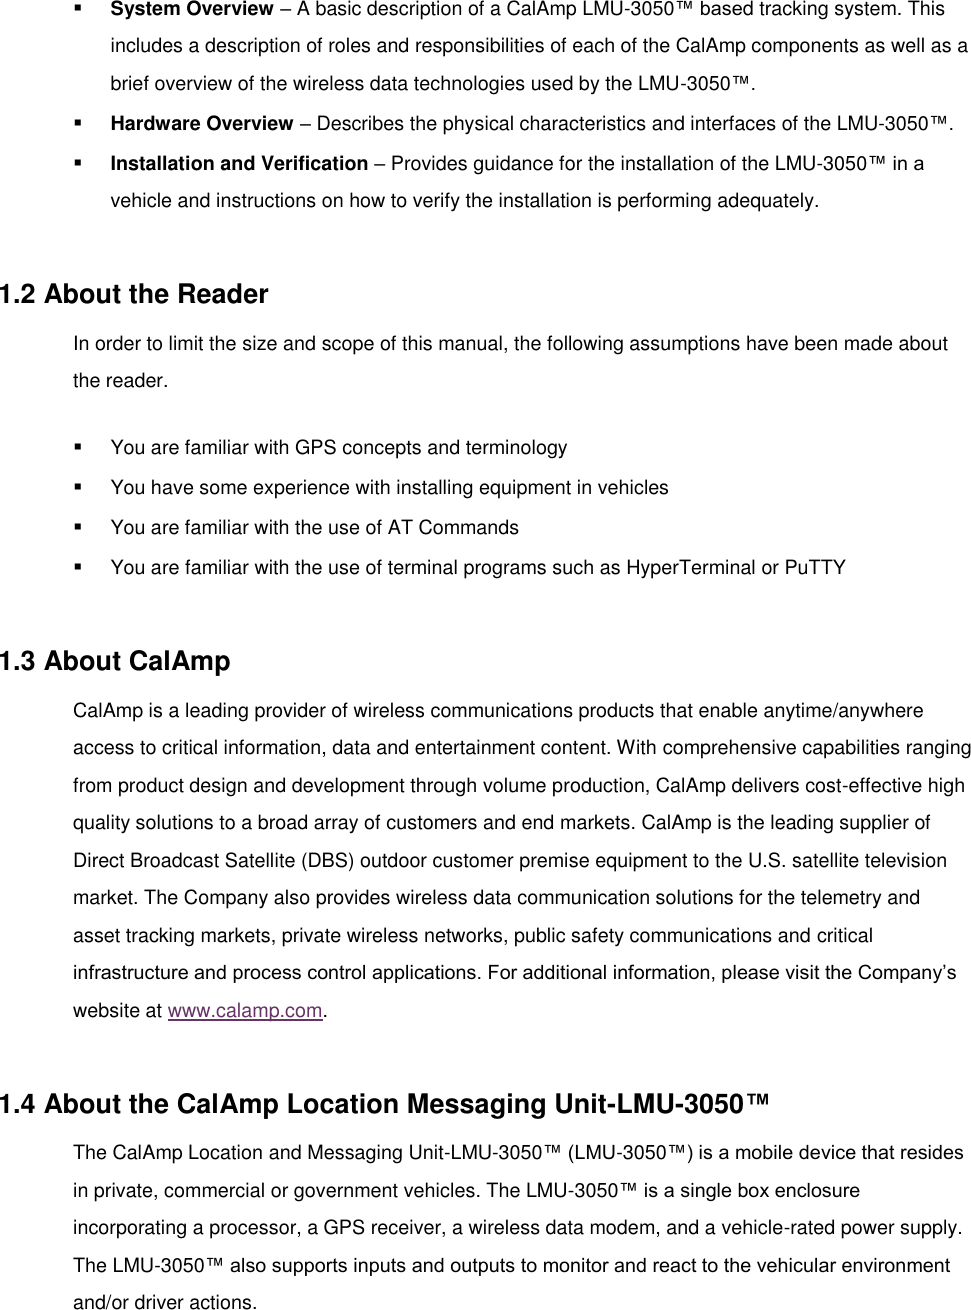   ▪ System Overview – A basic description of a CalAmp LMU-3050™ based tracking system. This includes a description of roles and responsibilities of each of the CalAmp components as well as a brief overview of the wireless data technologies used by the LMU-3050™. ▪ Hardware Overview – Describes the physical characteristics and interfaces of the LMU-3050™. ▪ Installation and Verification – Provides guidance for the installation of the LMU-3050™ in a vehicle and instructions on how to verify the installation is performing adequately.  1.2 About the Reader In order to limit the size and scope of this manual, the following assumptions have been made about the reader. ▪ You are familiar with GPS concepts and terminology ▪ You have some experience with installing equipment in vehicles ▪ You are familiar with the use of AT Commands ▪ You are familiar with the use of terminal programs such as HyperTerminal or PuTTY  1.3 About CalAmp CalAmp is a leading provider of wireless communications products that enable anytime/anywhere access to critical information, data and entertainment content. With comprehensive capabilities ranging from product design and development through volume production, CalAmp delivers cost-effective high quality solutions to a broad array of customers and end markets. CalAmp is the leading supplier of Direct Broadcast Satellite (DBS) outdoor customer premise equipment to the U.S. satellite television market. The Company also provides wireless data communication solutions for the telemetry and asset tracking markets, private wireless networks, public safety communications and critical infrastructure and process control applications. For additional information, please visit the Company’s website at www.calamp.com.  1.4 About the CalAmp Location Messaging Unit-LMU-3050™ The CalAmp Location and Messaging Unit-LMU-3050™ (LMU-3050™) is a mobile device that resides in private, commercial or government vehicles. The LMU-3050™ is a single box enclosure incorporating a processor, a GPS receiver, a wireless data modem, and a vehicle-rated power supply. The LMU-3050™ also supports inputs and outputs to monitor and react to the vehicular environment and/or driver actions. 